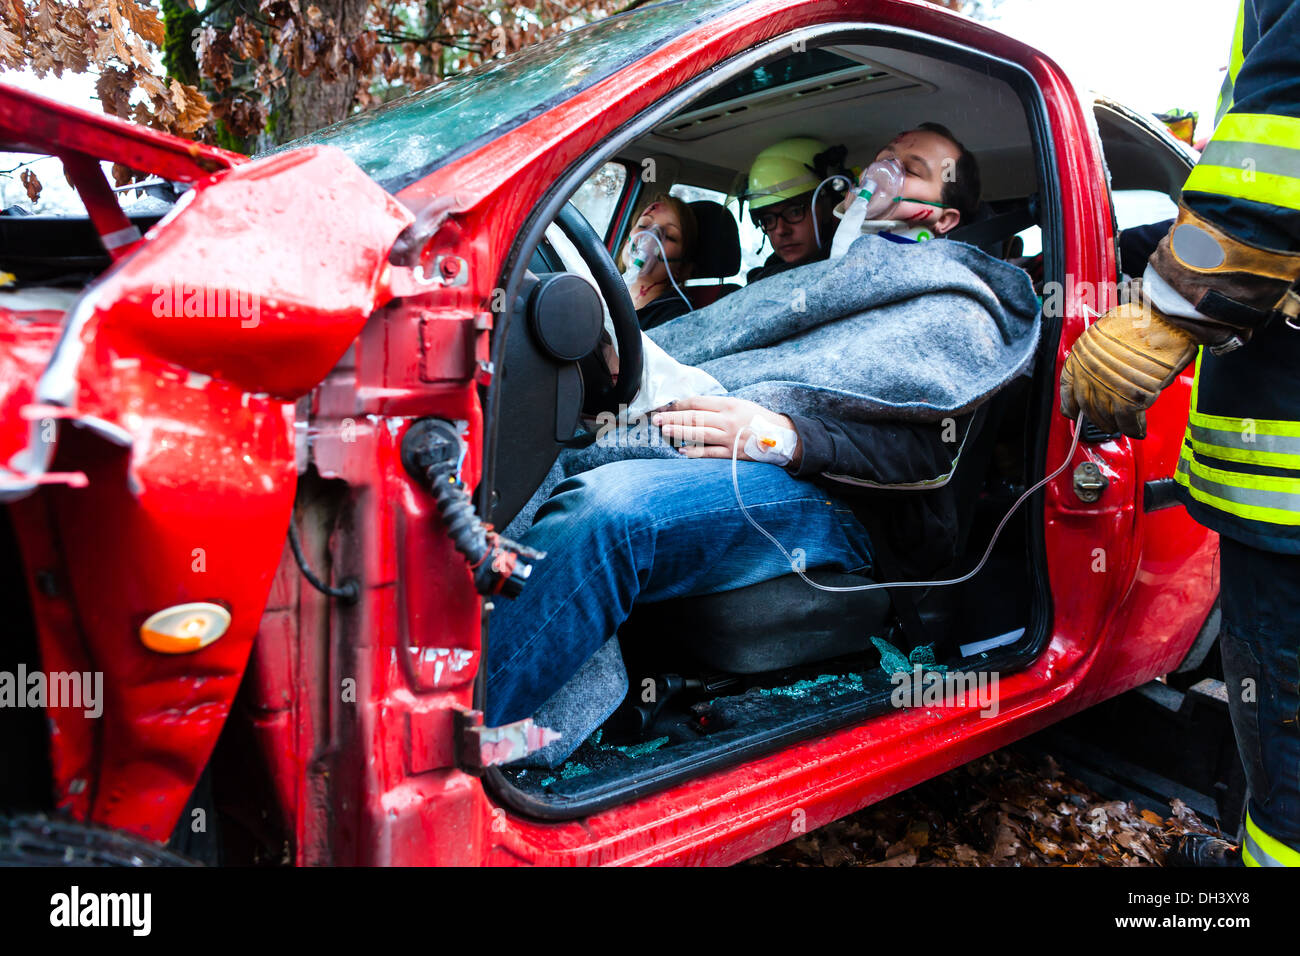 Accident - victim in a crashed vehicle, she receives first aid from firefighters Stock Photo